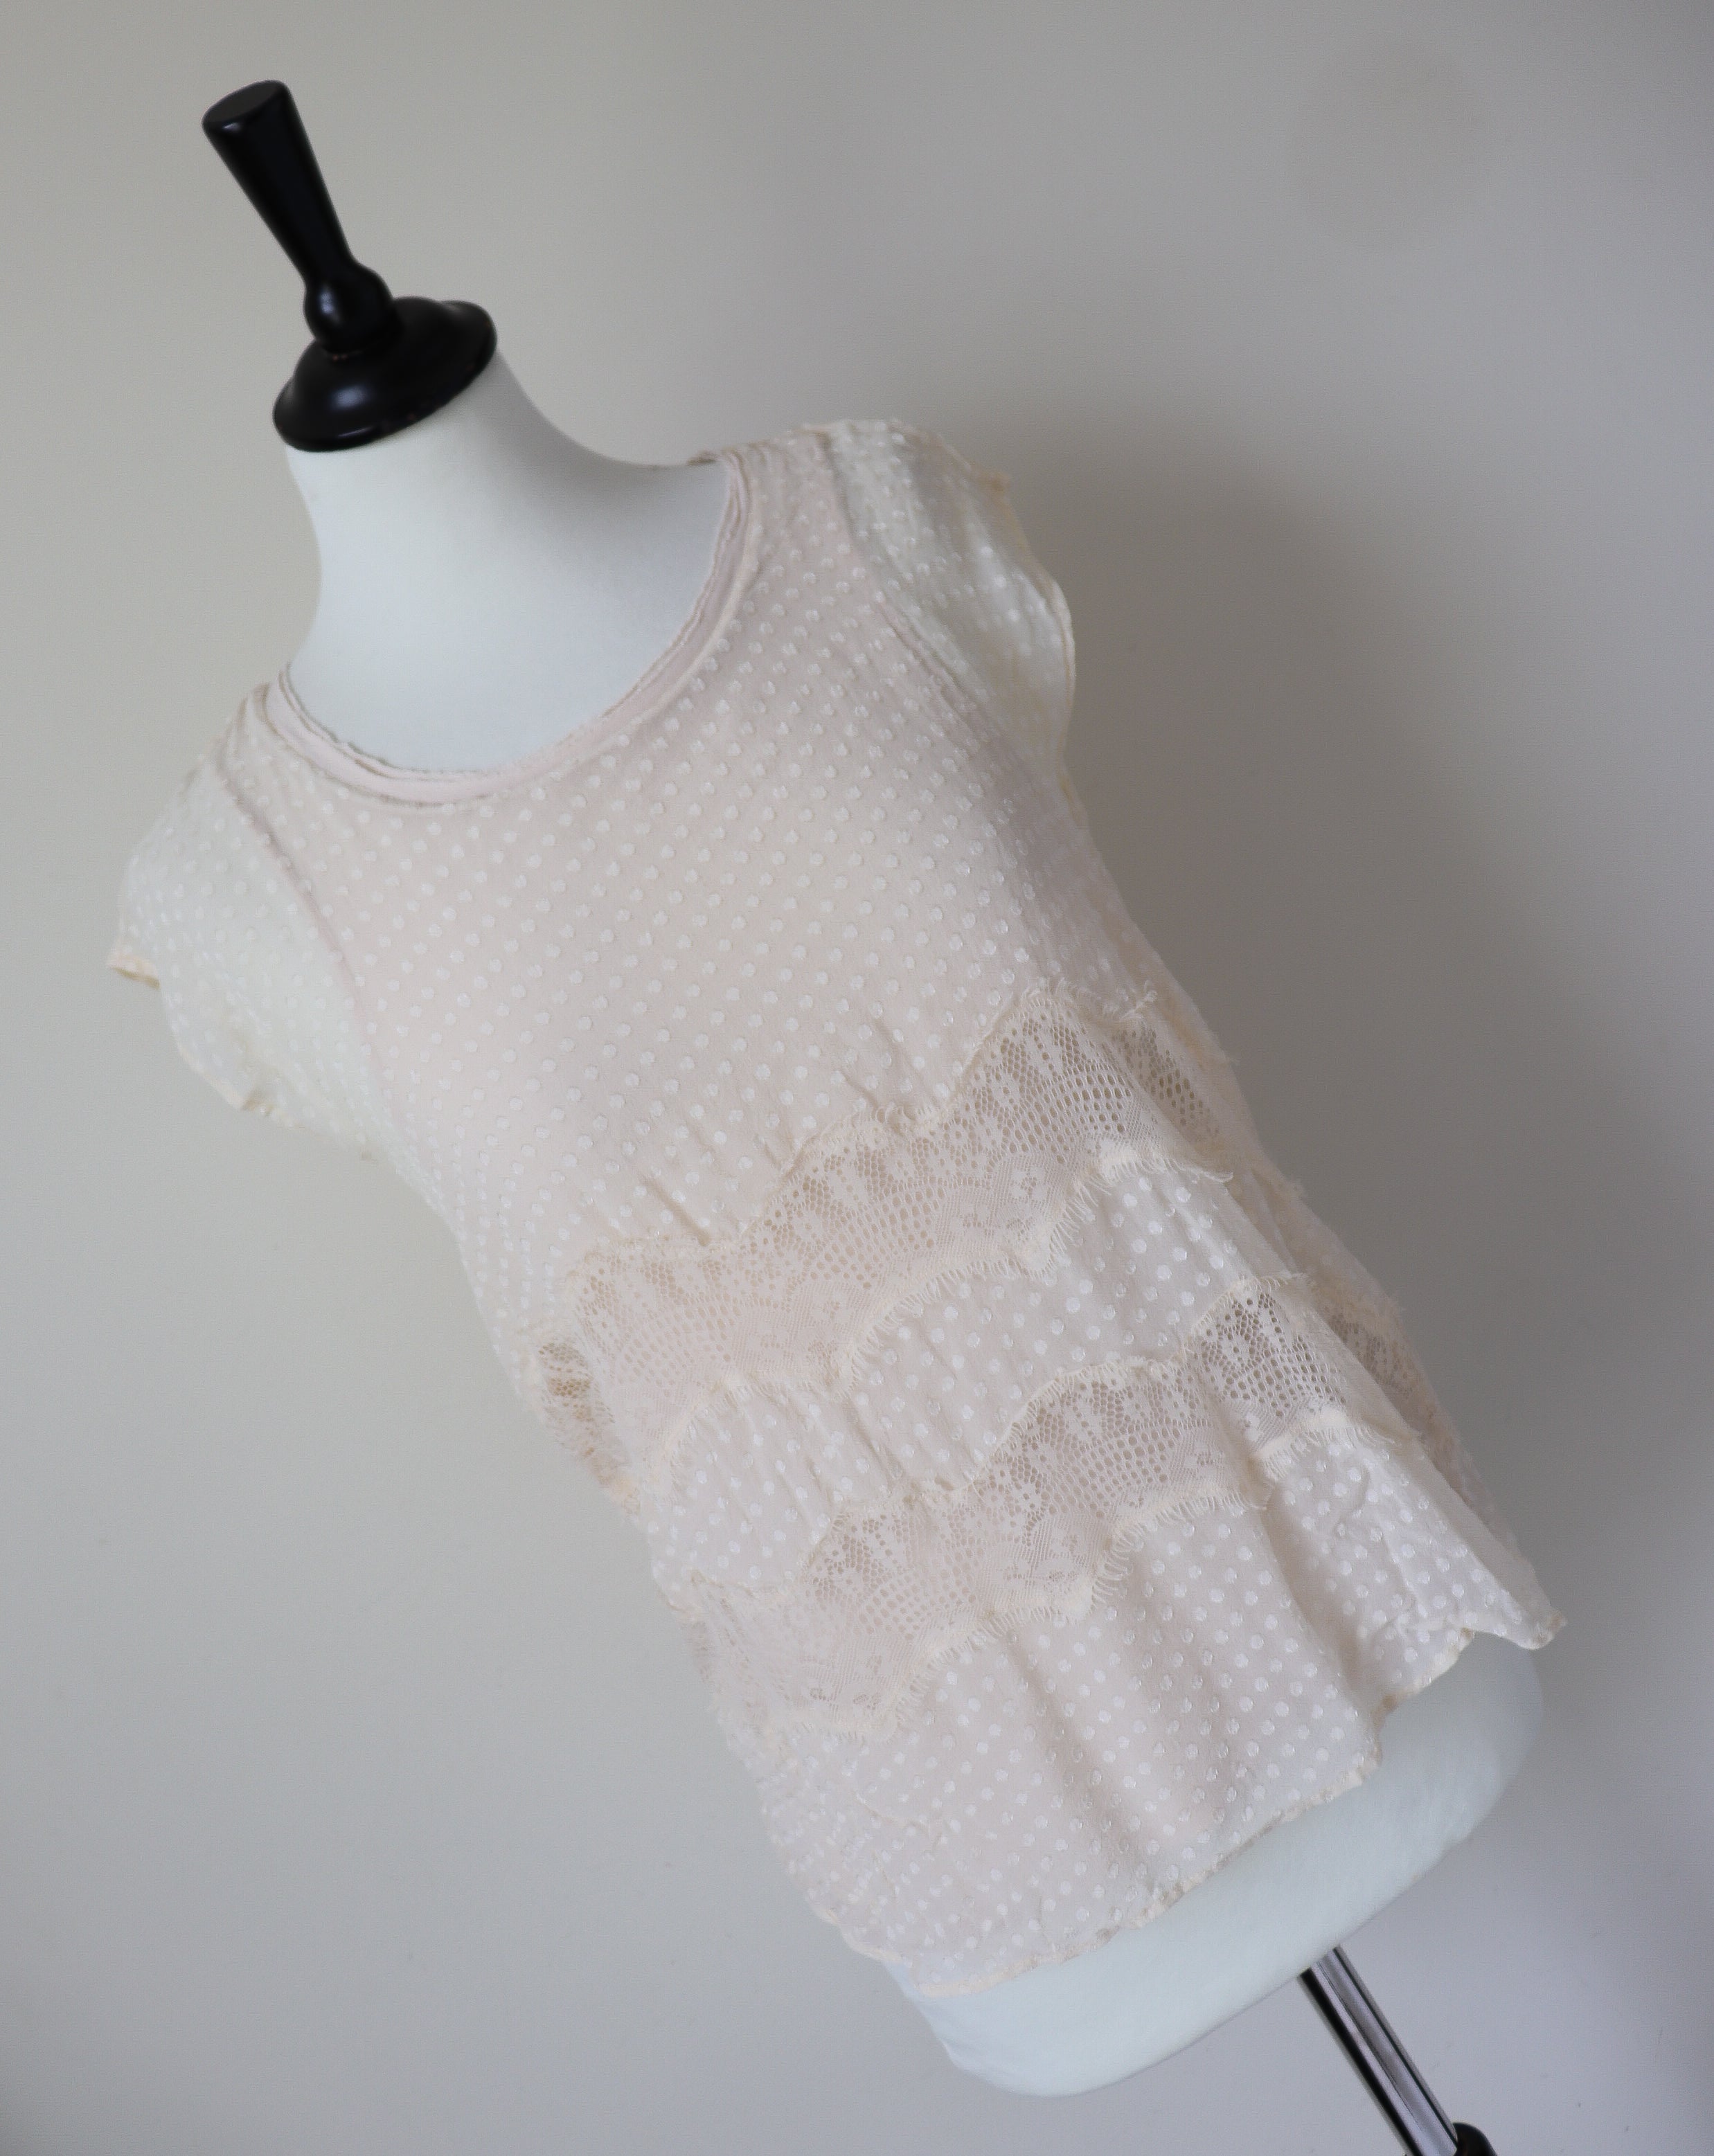 Cream Lace Vest Top - Intimissimi - Camisole / Shell Top - S / UK 10